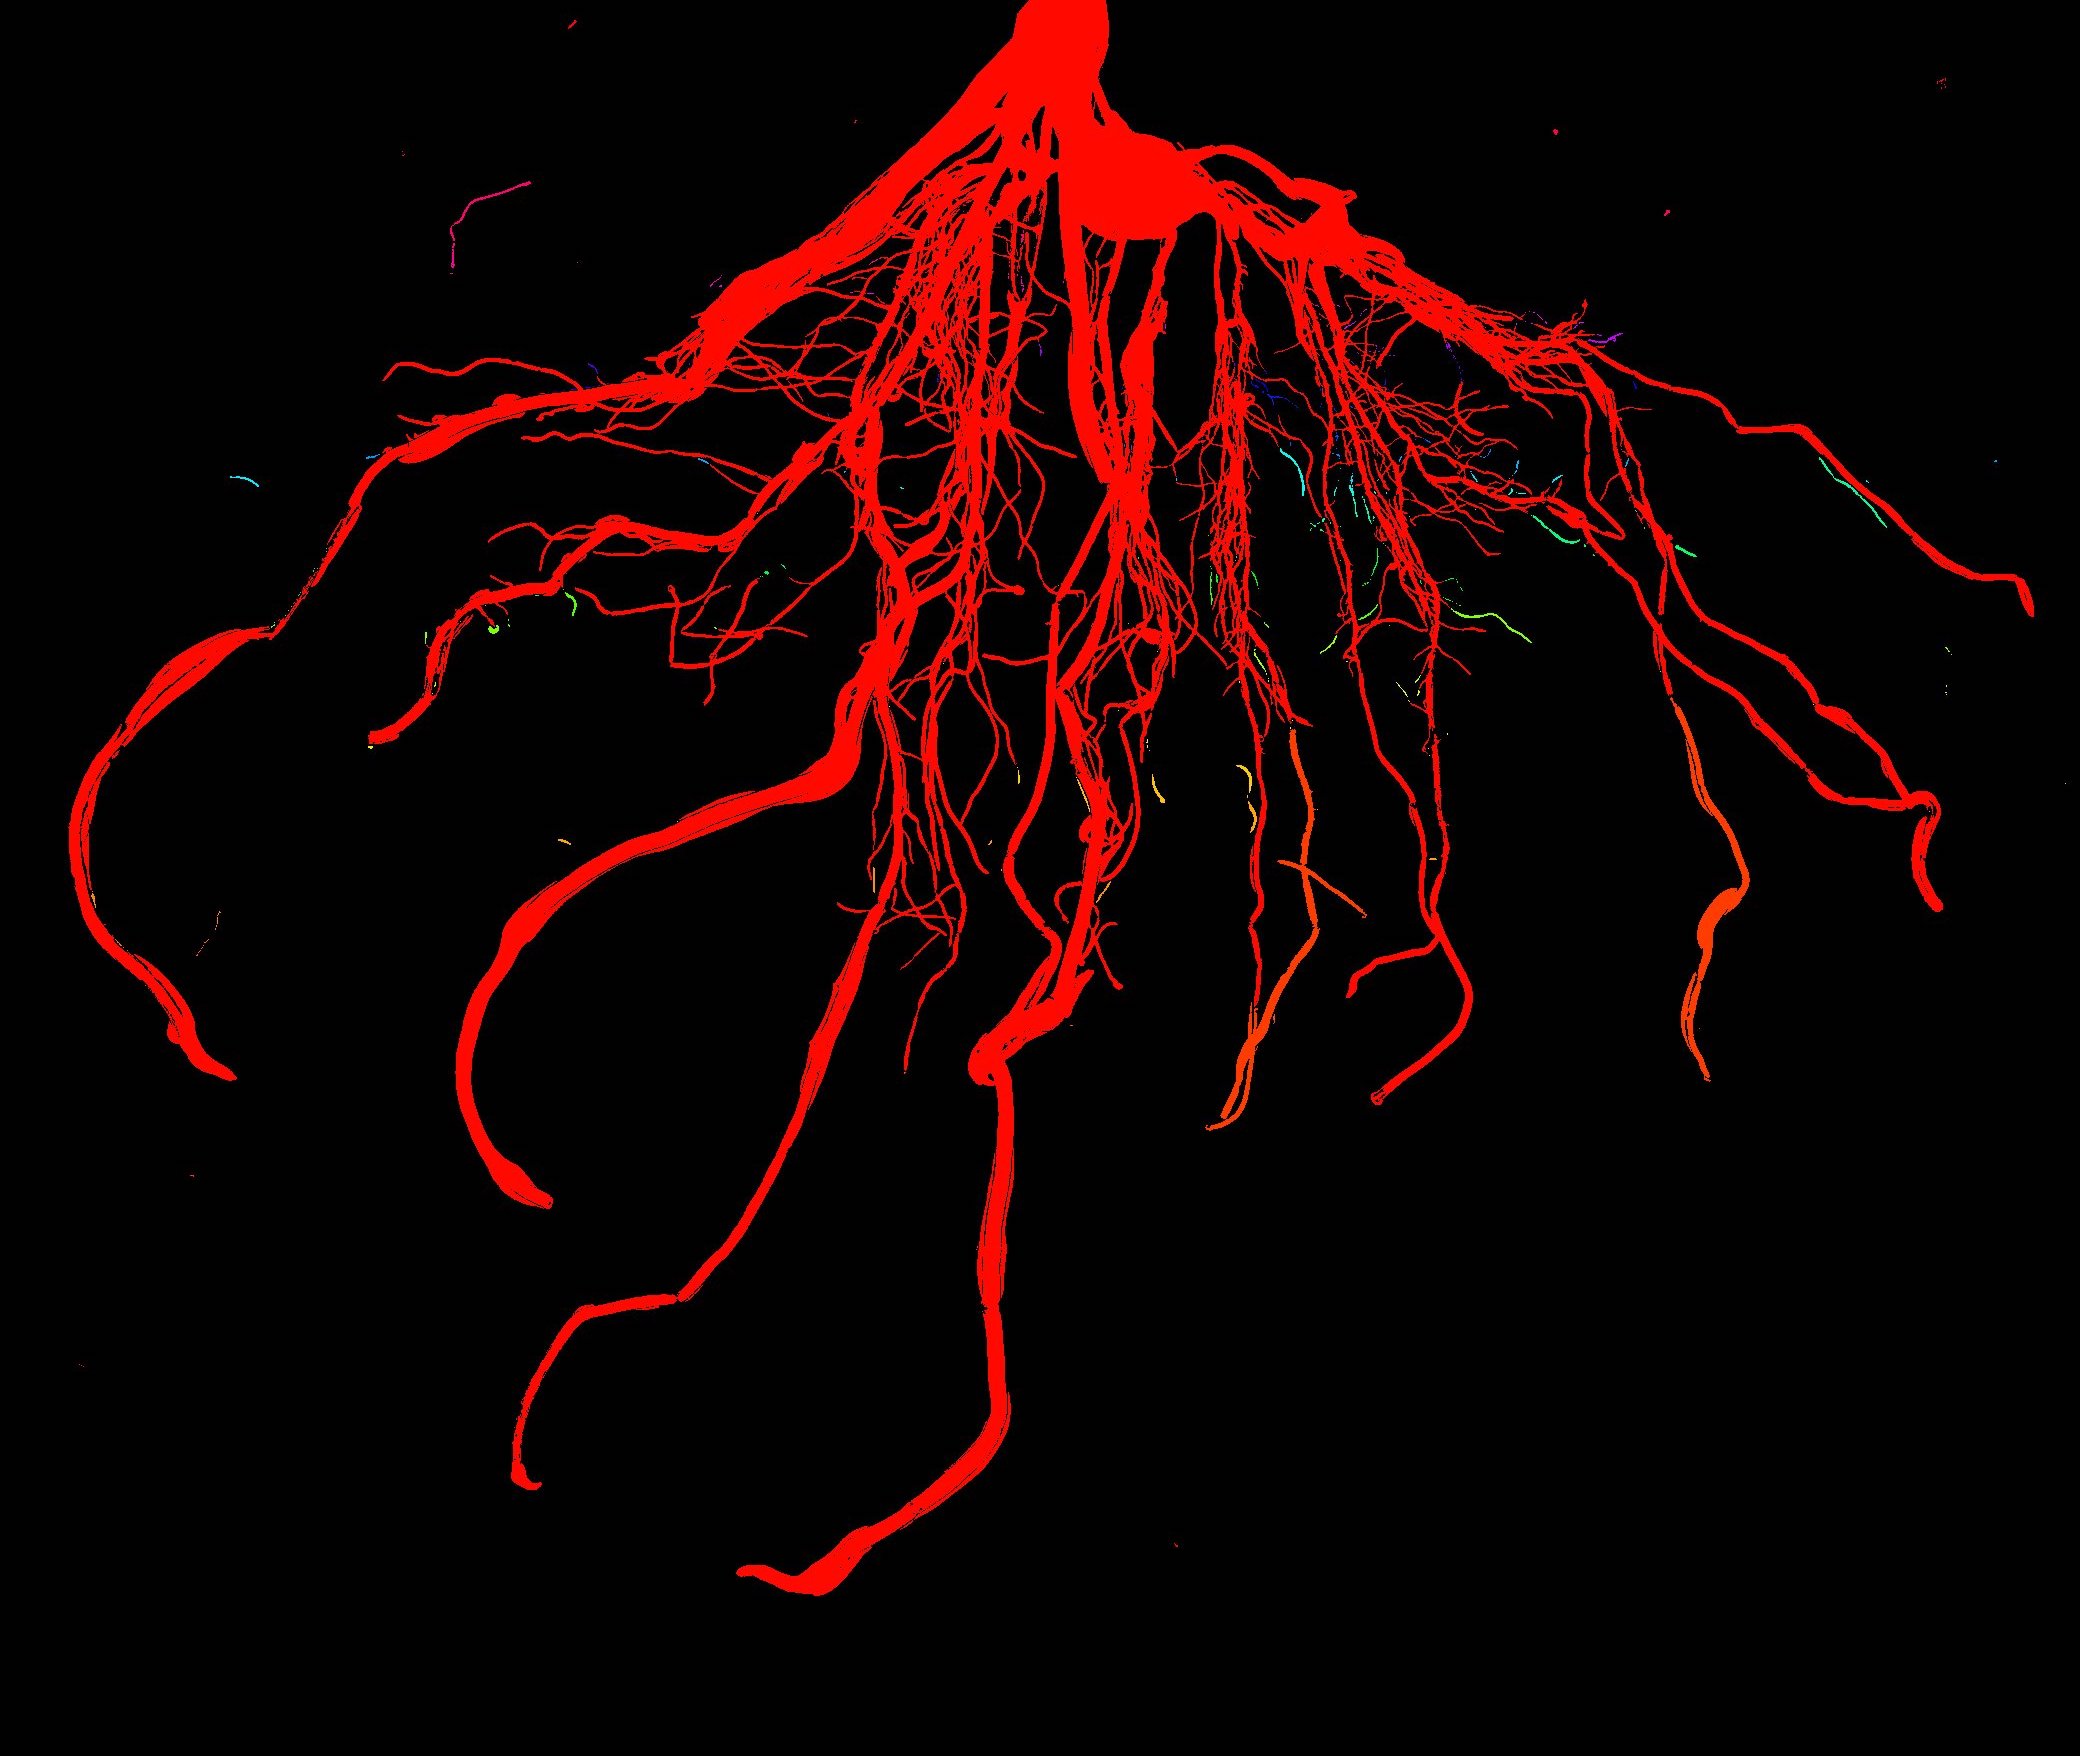 The root system of a three-week-old corn plant processed through a computer vision pipeline used to automatically measure different root system architecture traits.